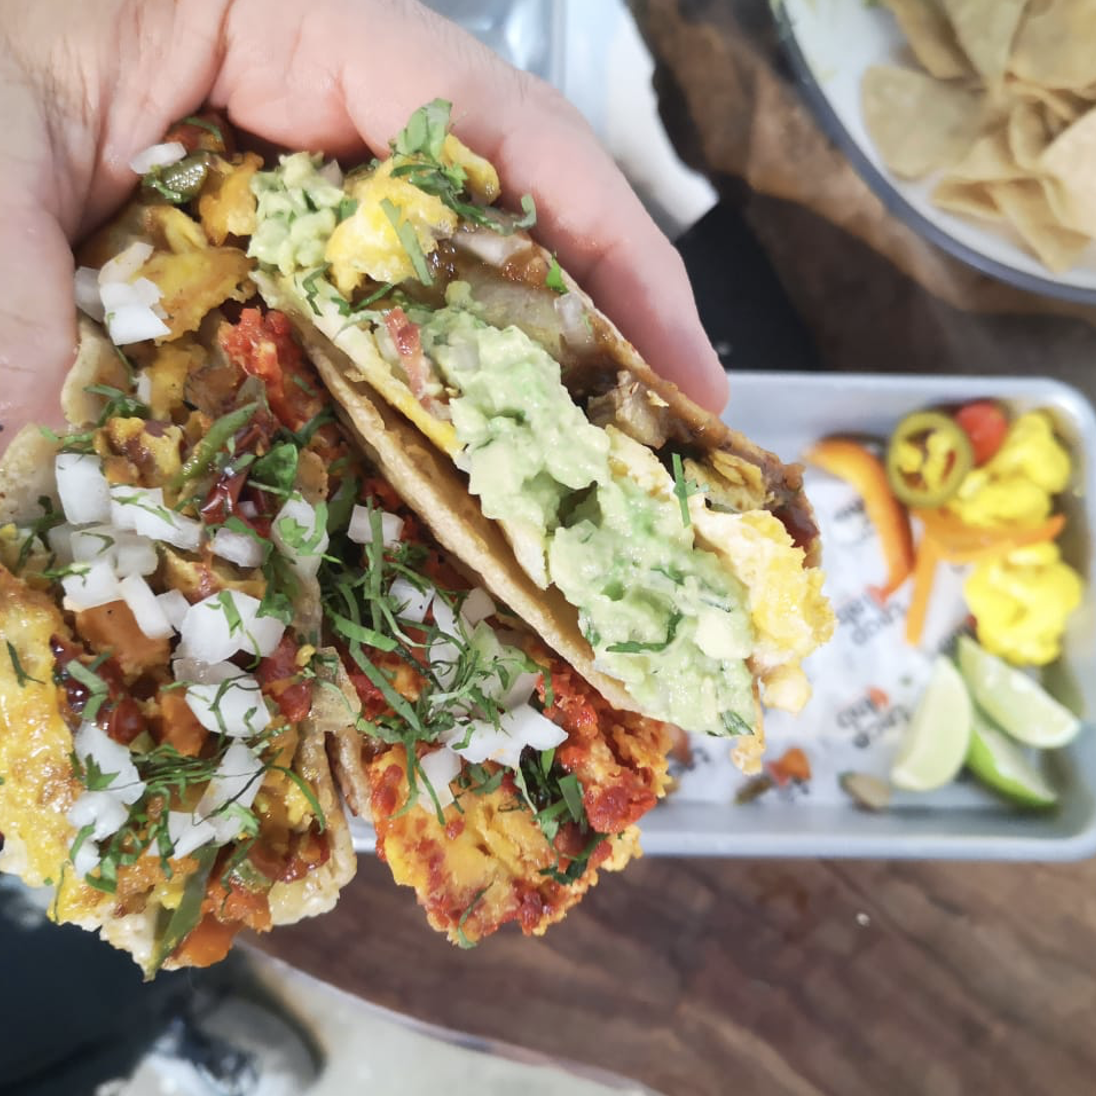 vitamin t, brand experience, chasing tacos